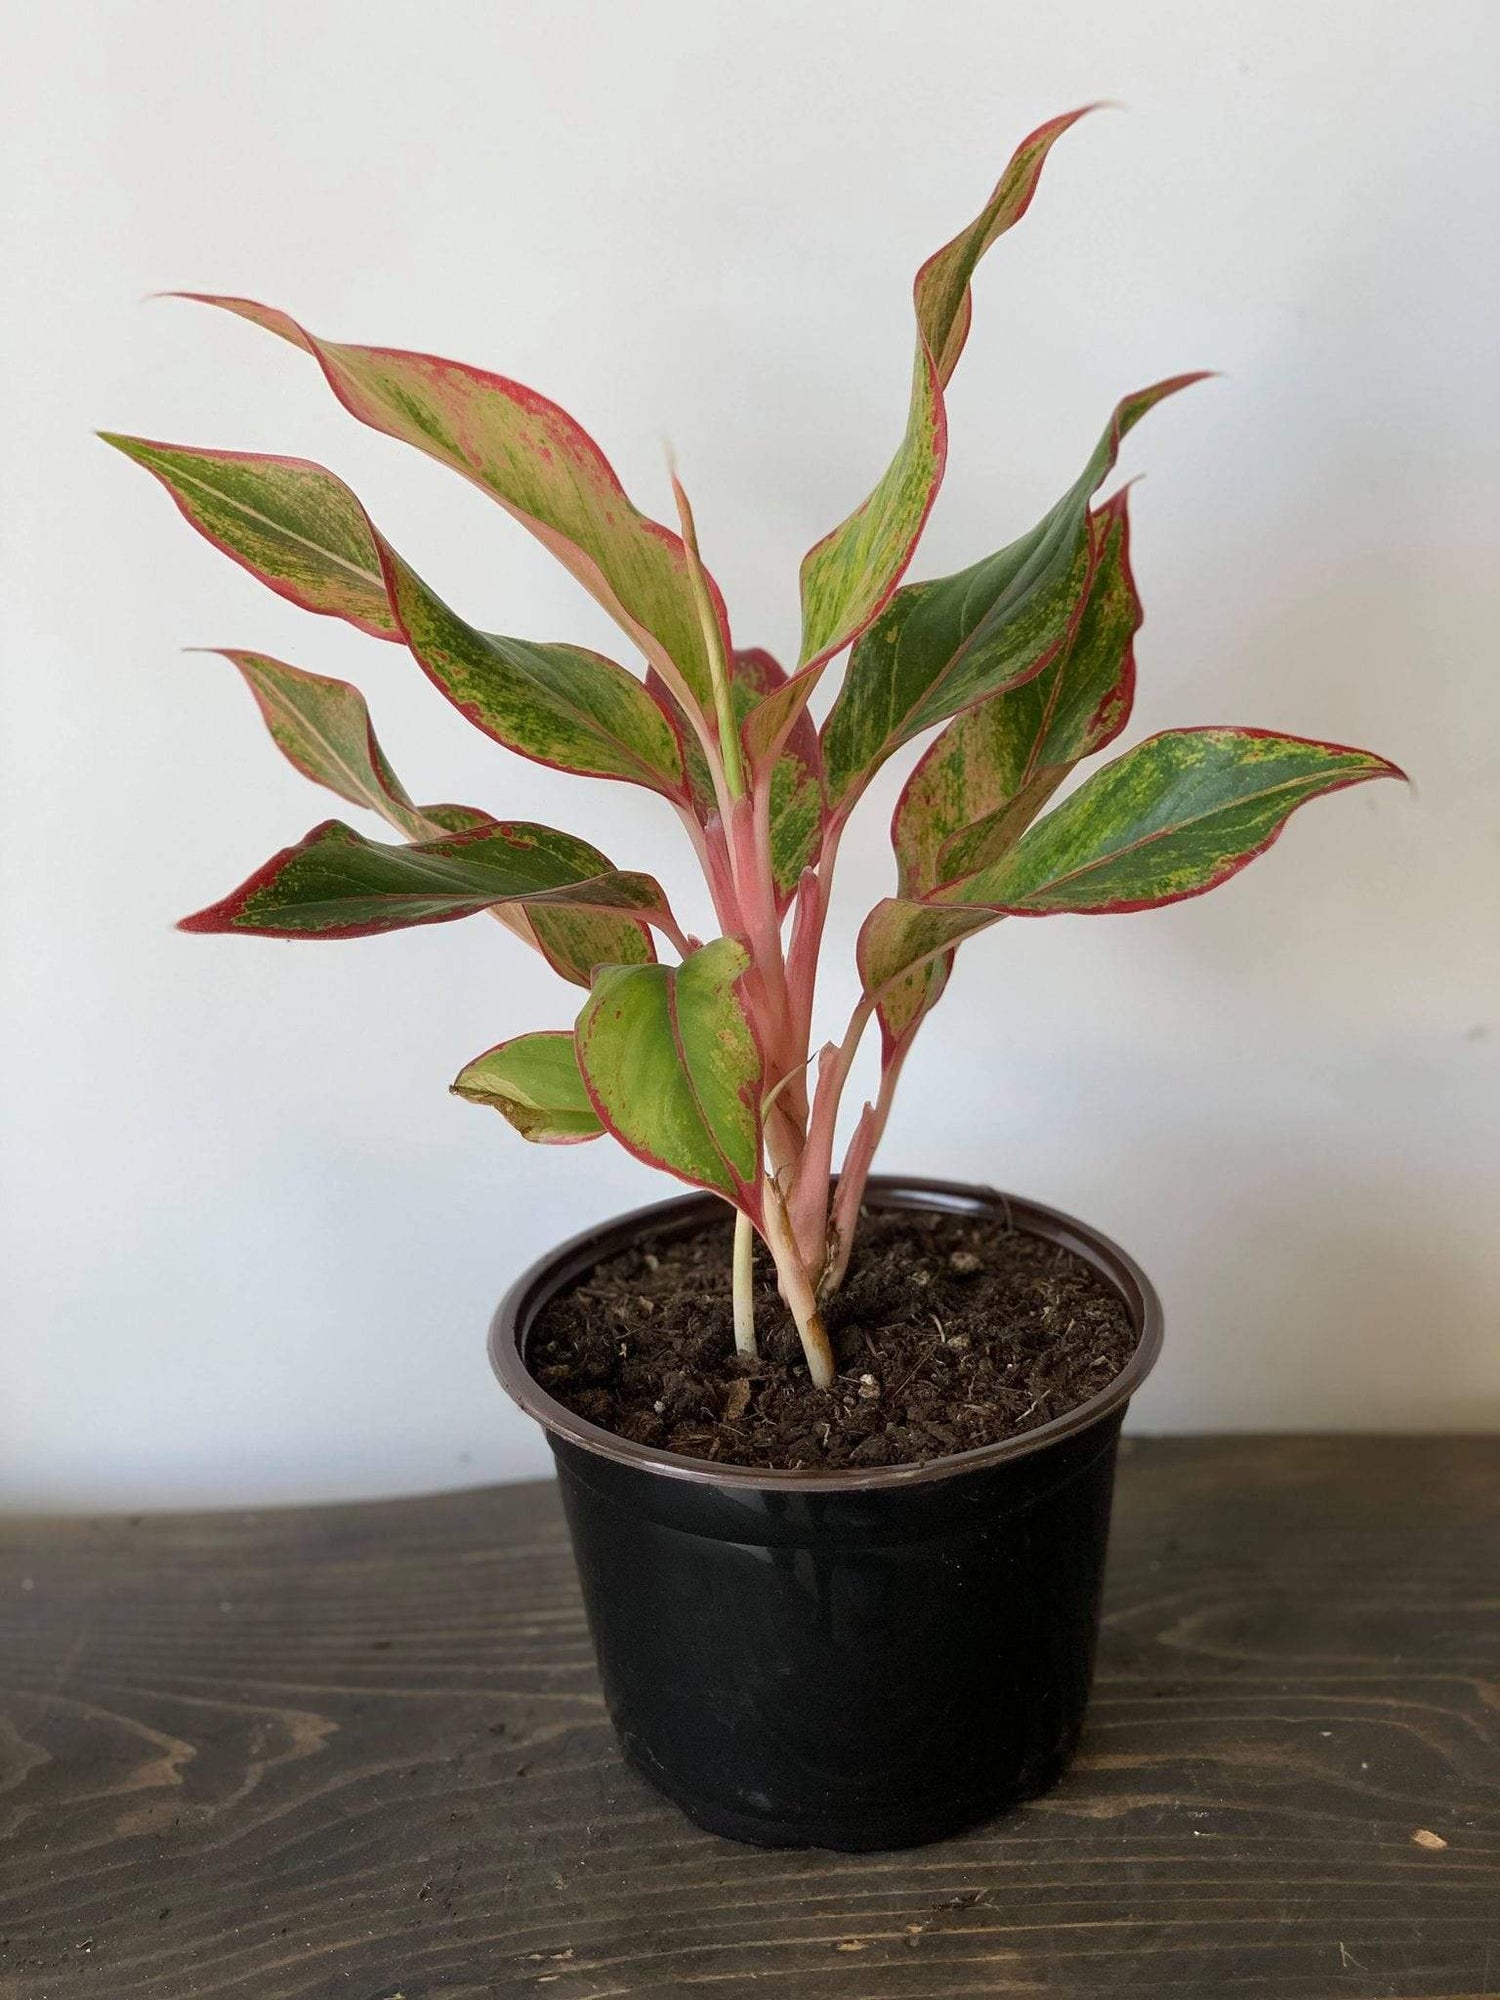 Urban Sprouts Plant 6" in nursery pot Chinese Evergreen 'Siam Aurora'